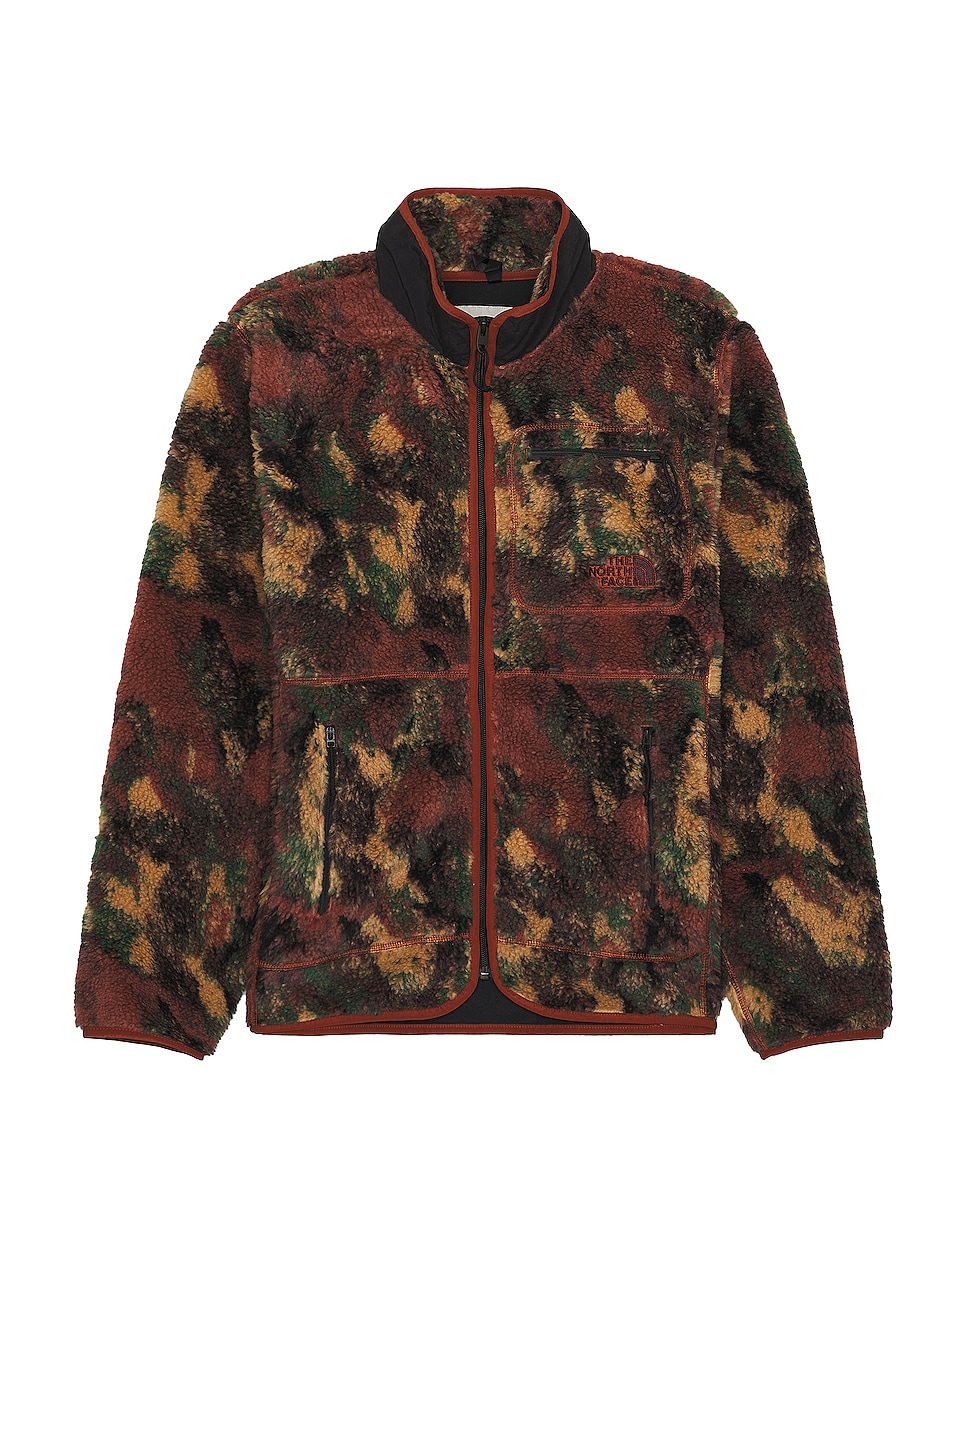 Image 1 of The North Face Extreme Pile Full Zip Jacket in Brandy Brown Evolved Texture Print